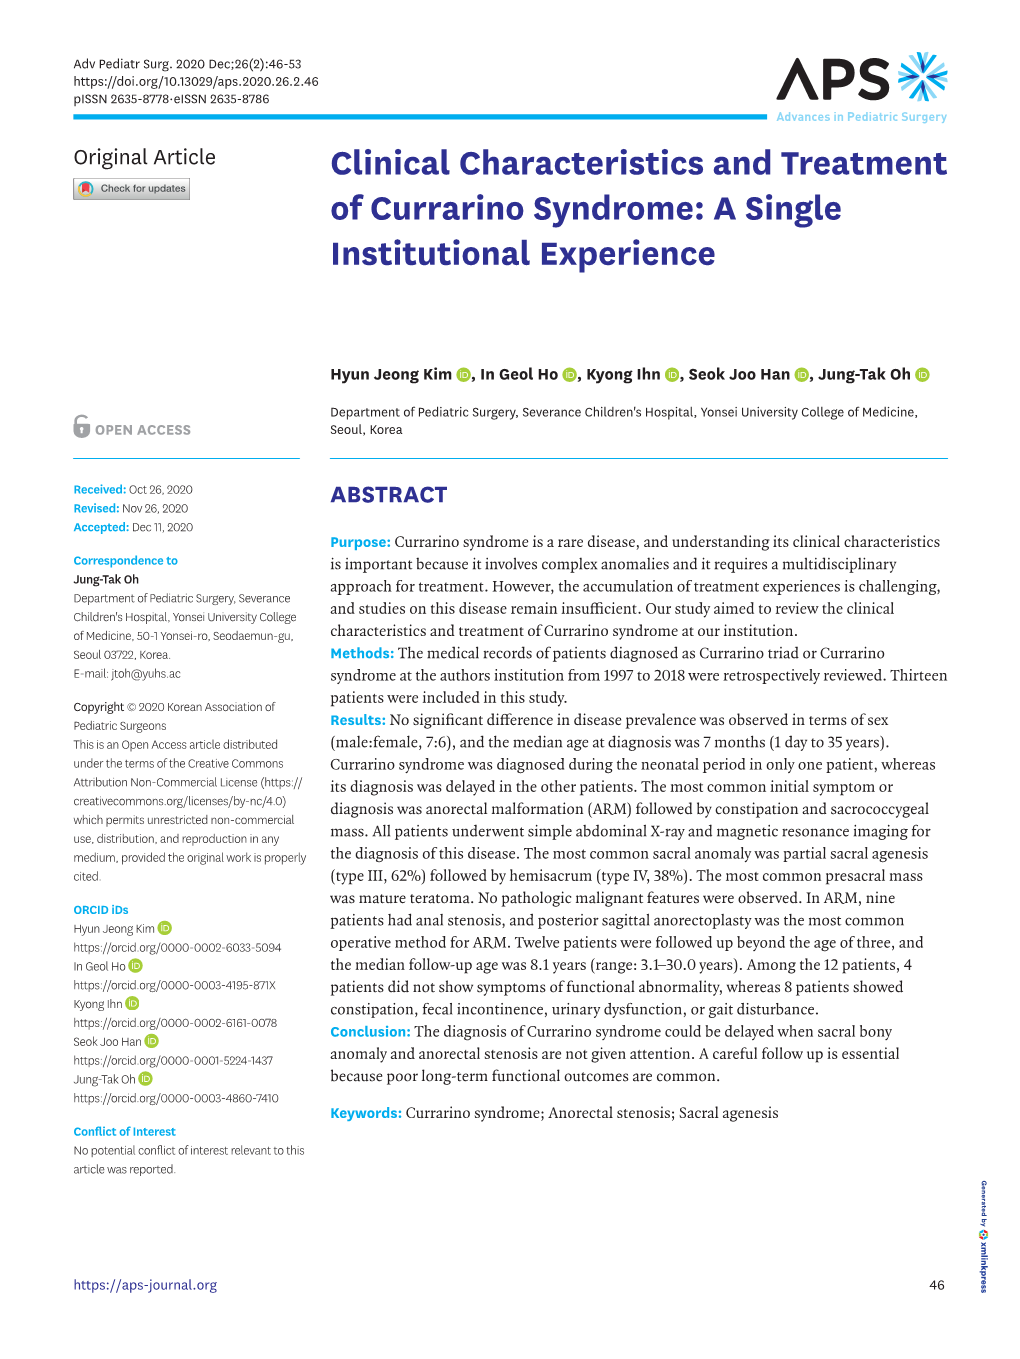 Clinical Characteristics and Treatment of Currarino Syndrome: a Single Institutional Experience